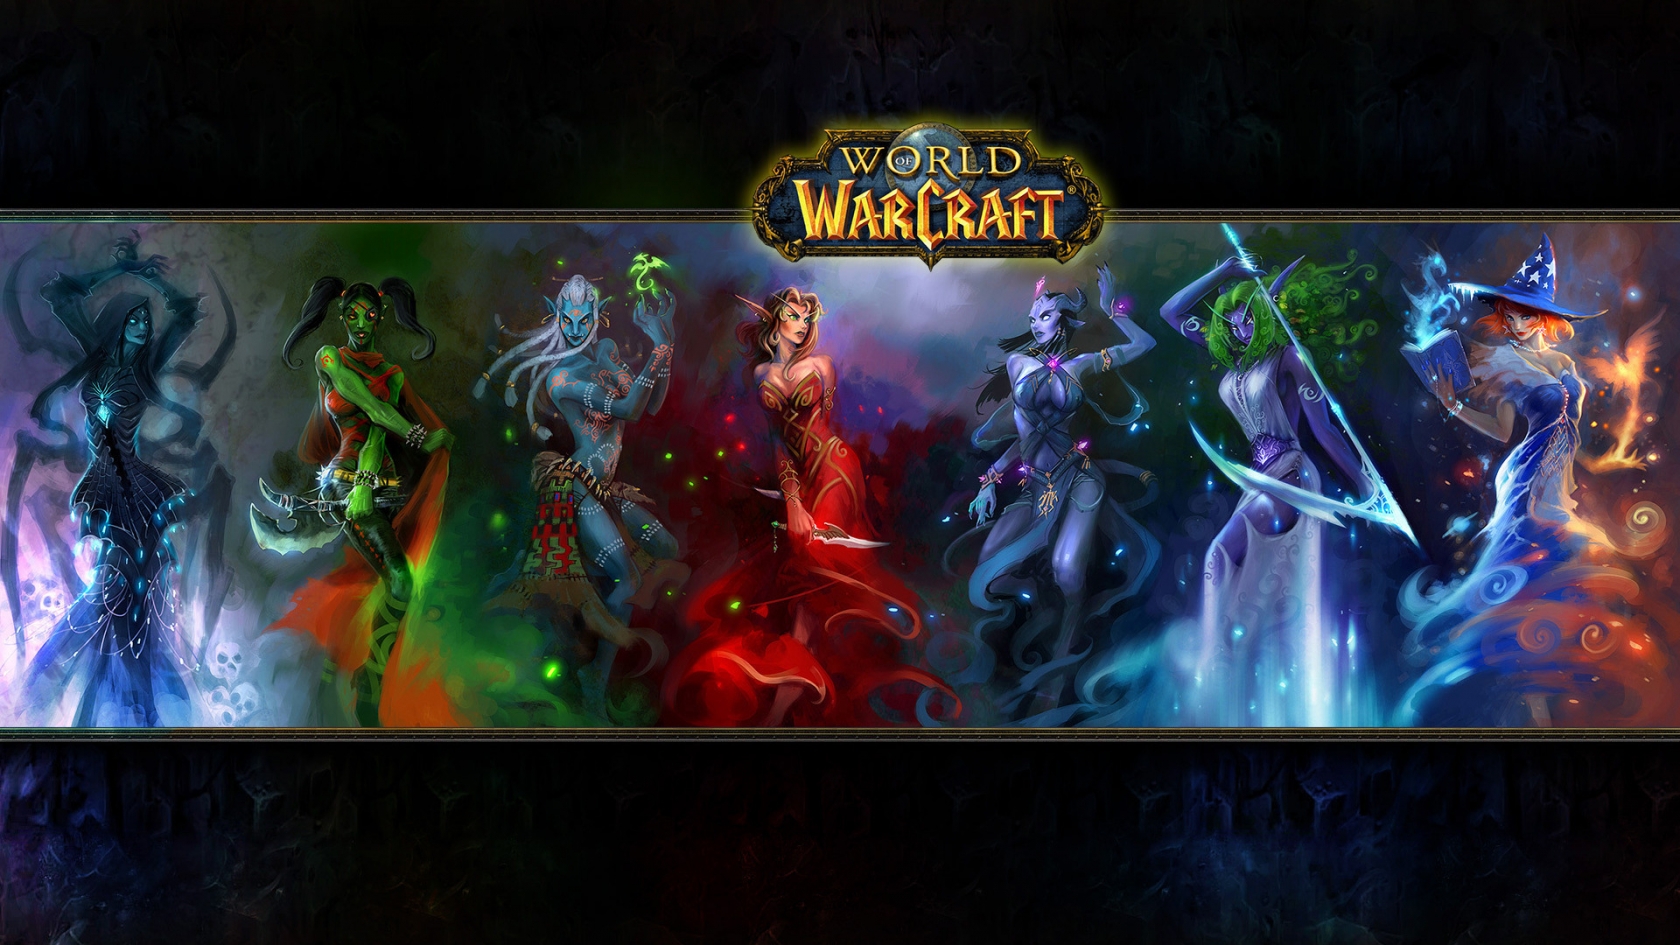 World of Warcraft for 1680 x 945 HDTV resolution